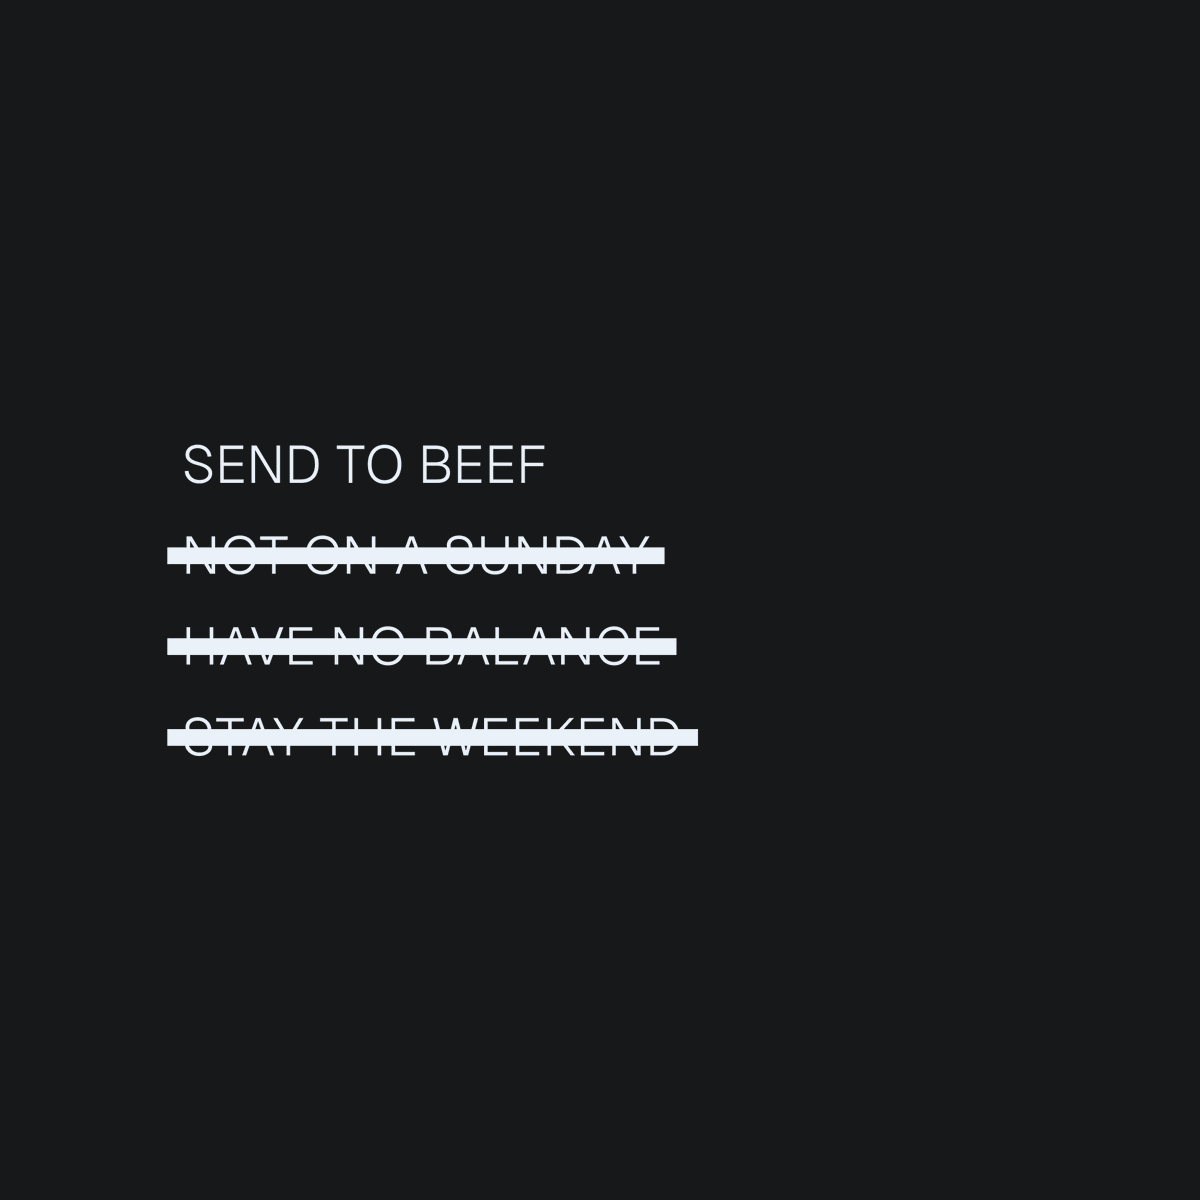 As an example: Some tasks require an address that contains certain letters such as 'beef' or 'deaf' — a mechanism I had previously used in BEEF. While others require transferring e.g. on a specific day of the week, in summer, when gas is low/high etc. (4/n)